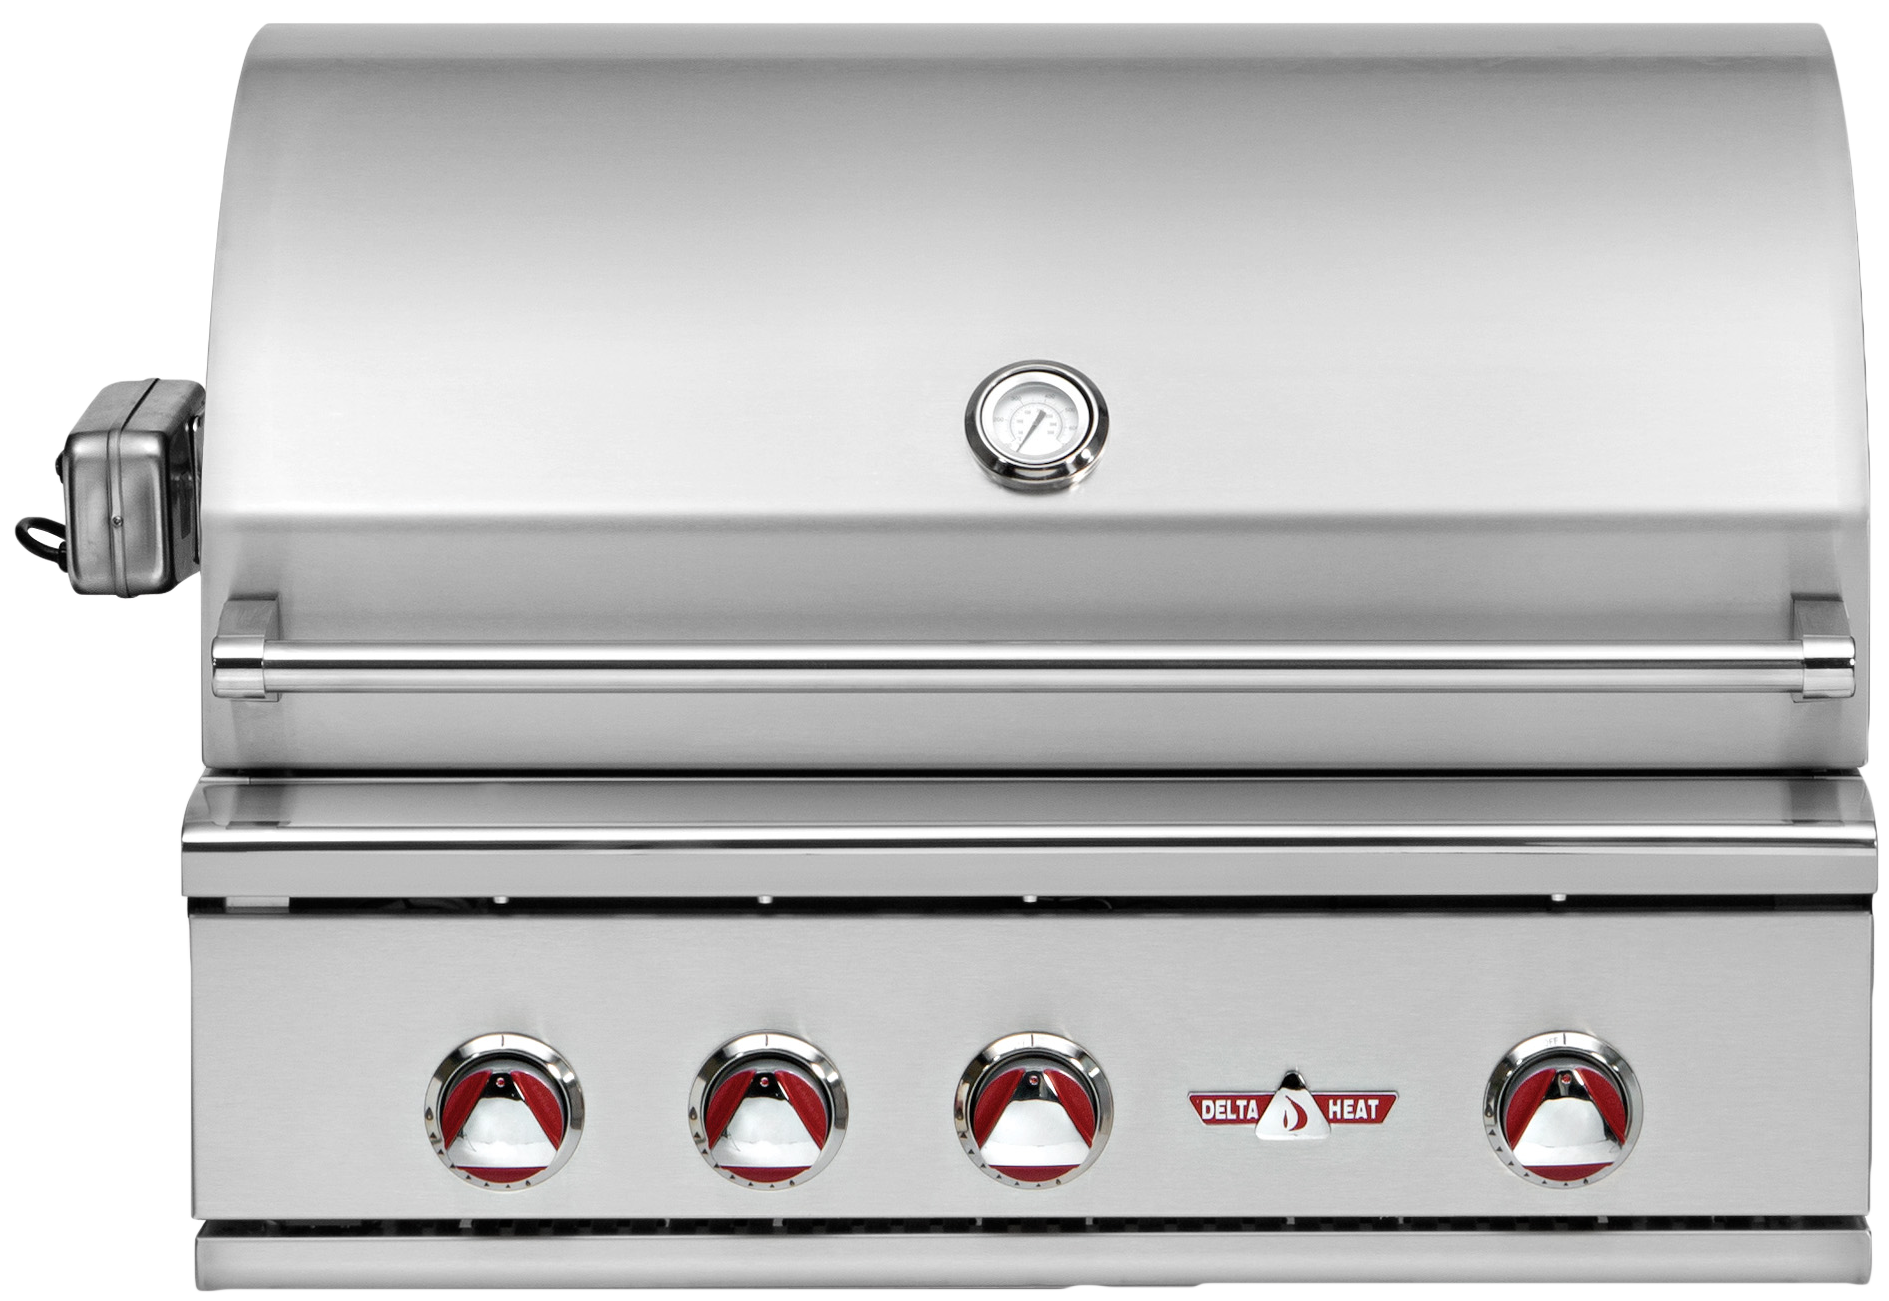 32 inch stainless steel built-in gas grill